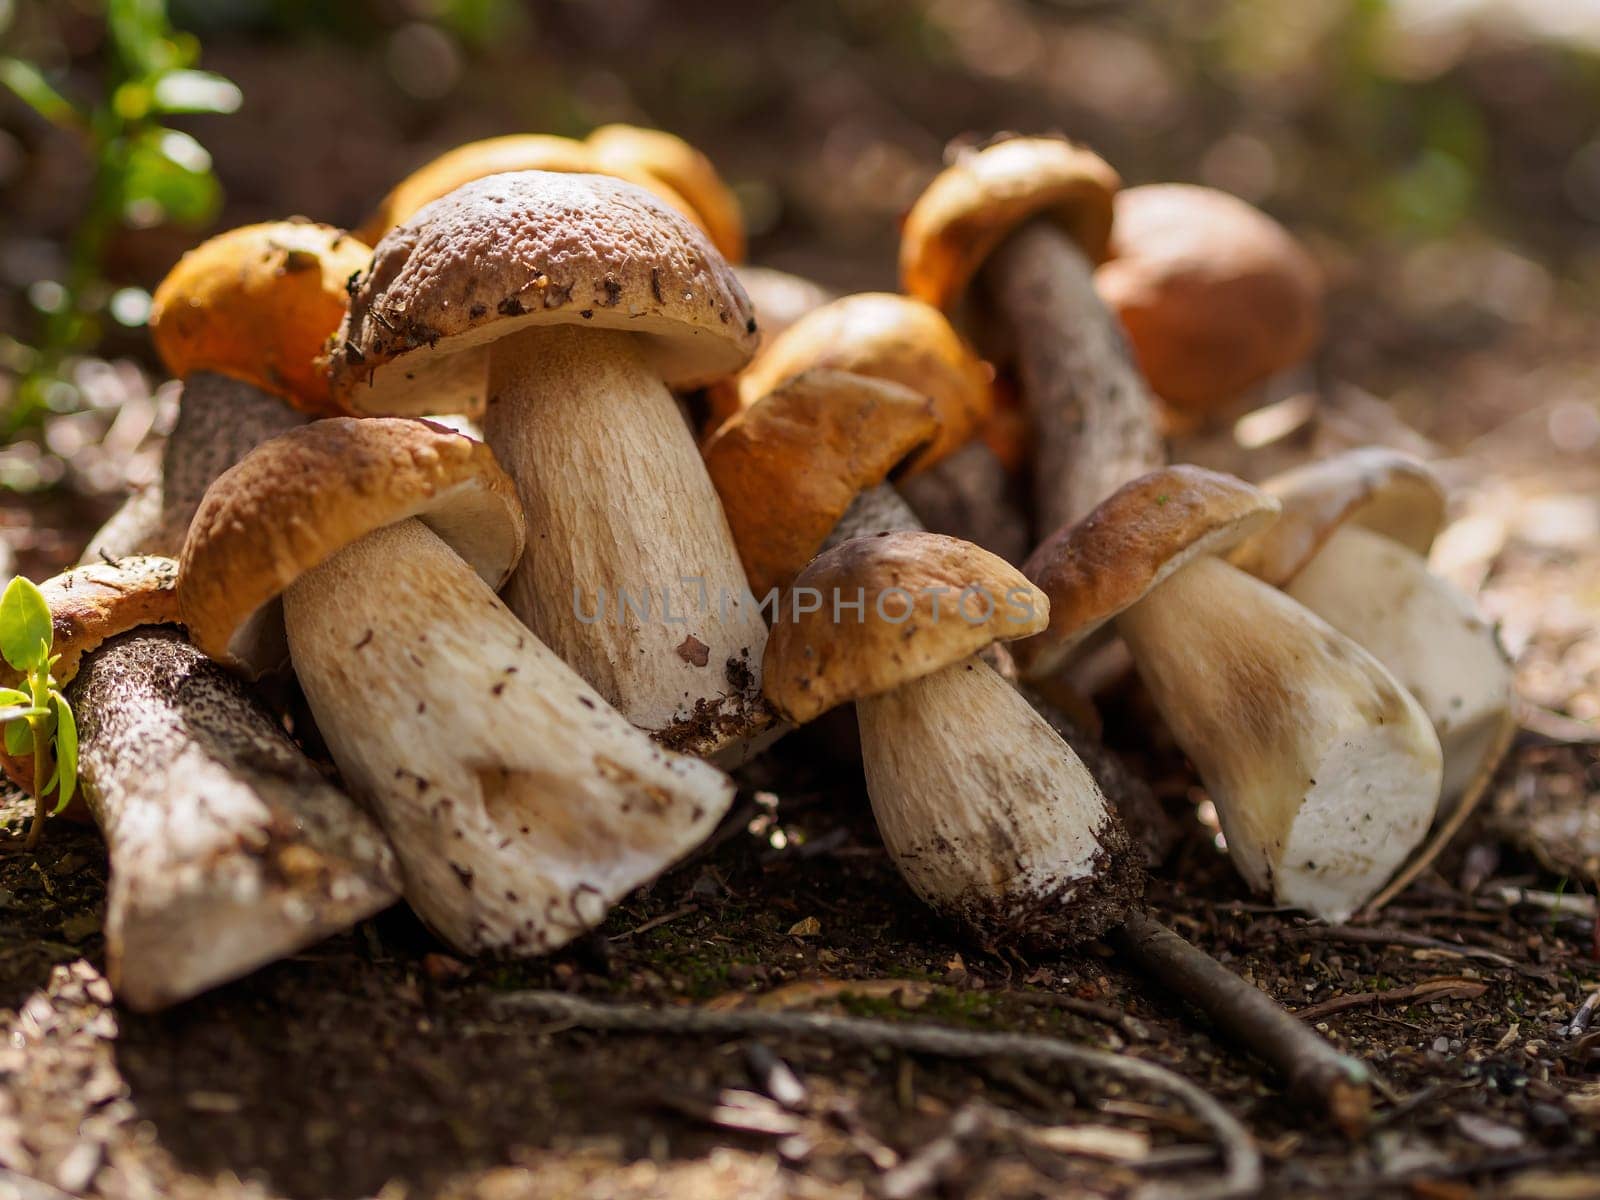 Collected porcini mushrooms on the ground. Pile of porcini mushrooms. by Andre1ns